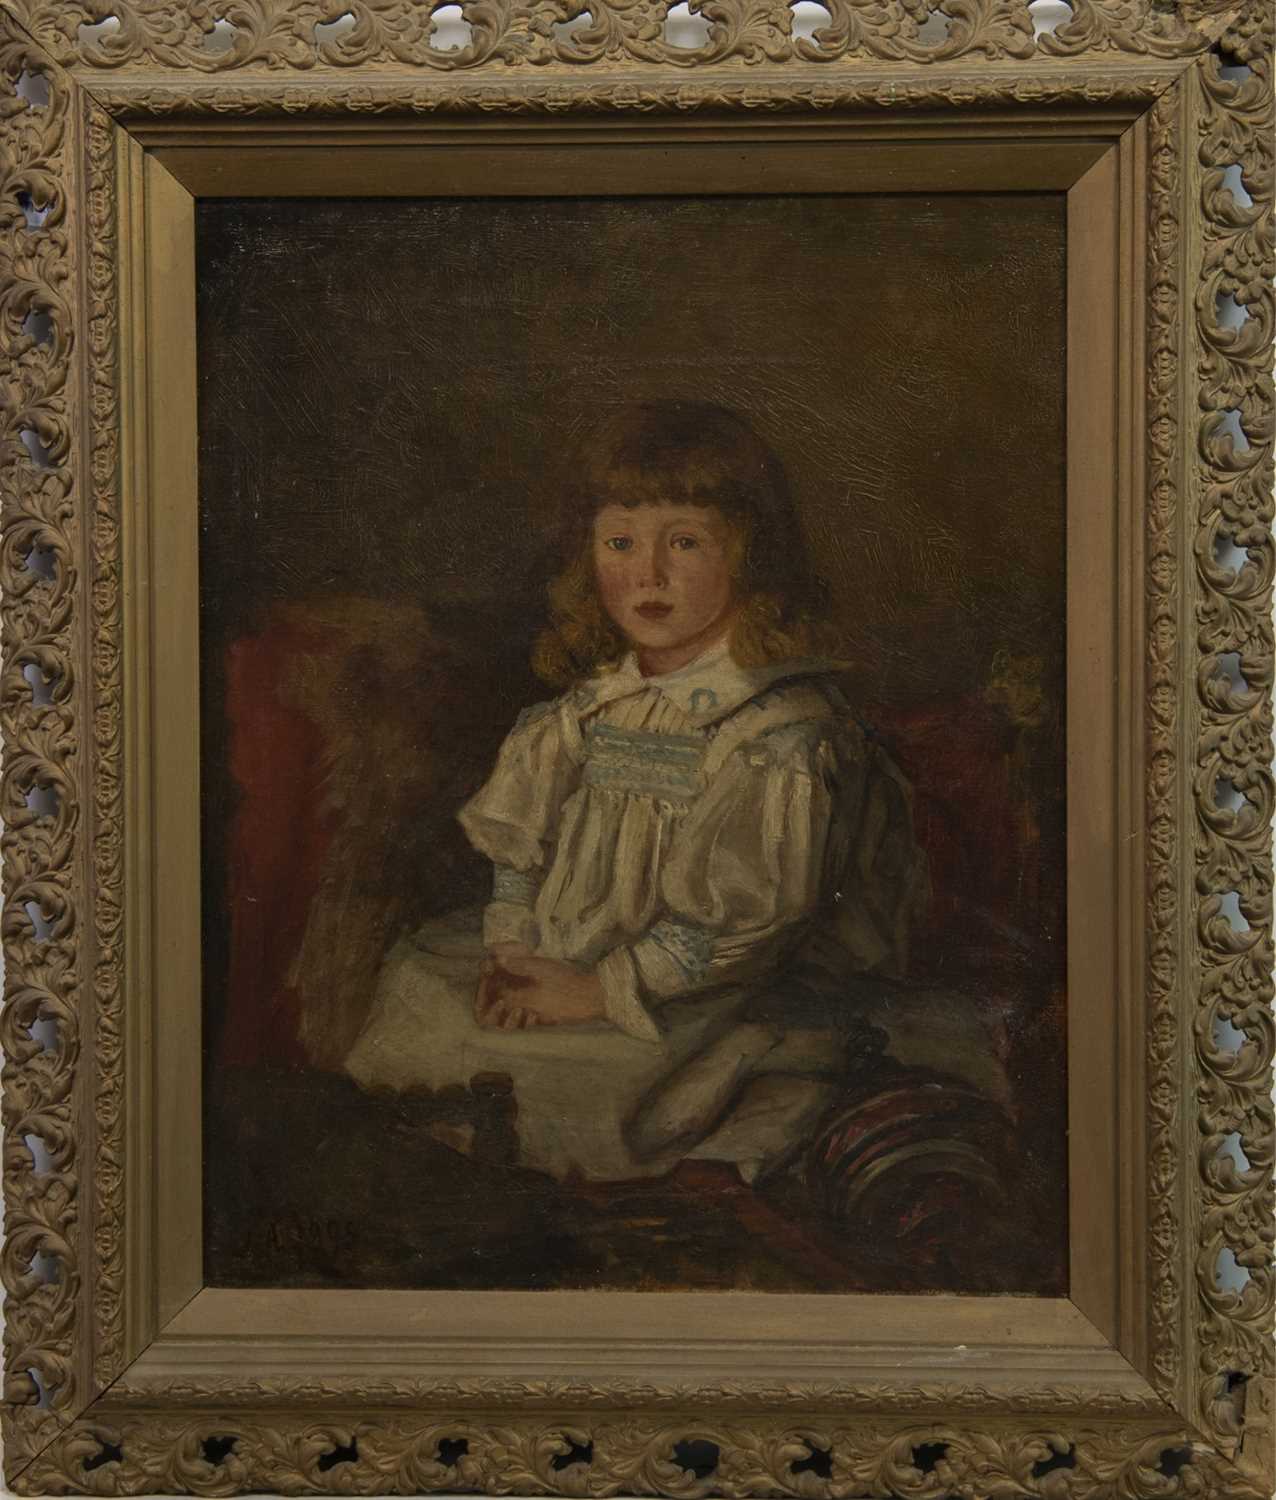 Lot 67 - PORTRAIT OF A YOUNG GIRL, AN OIL